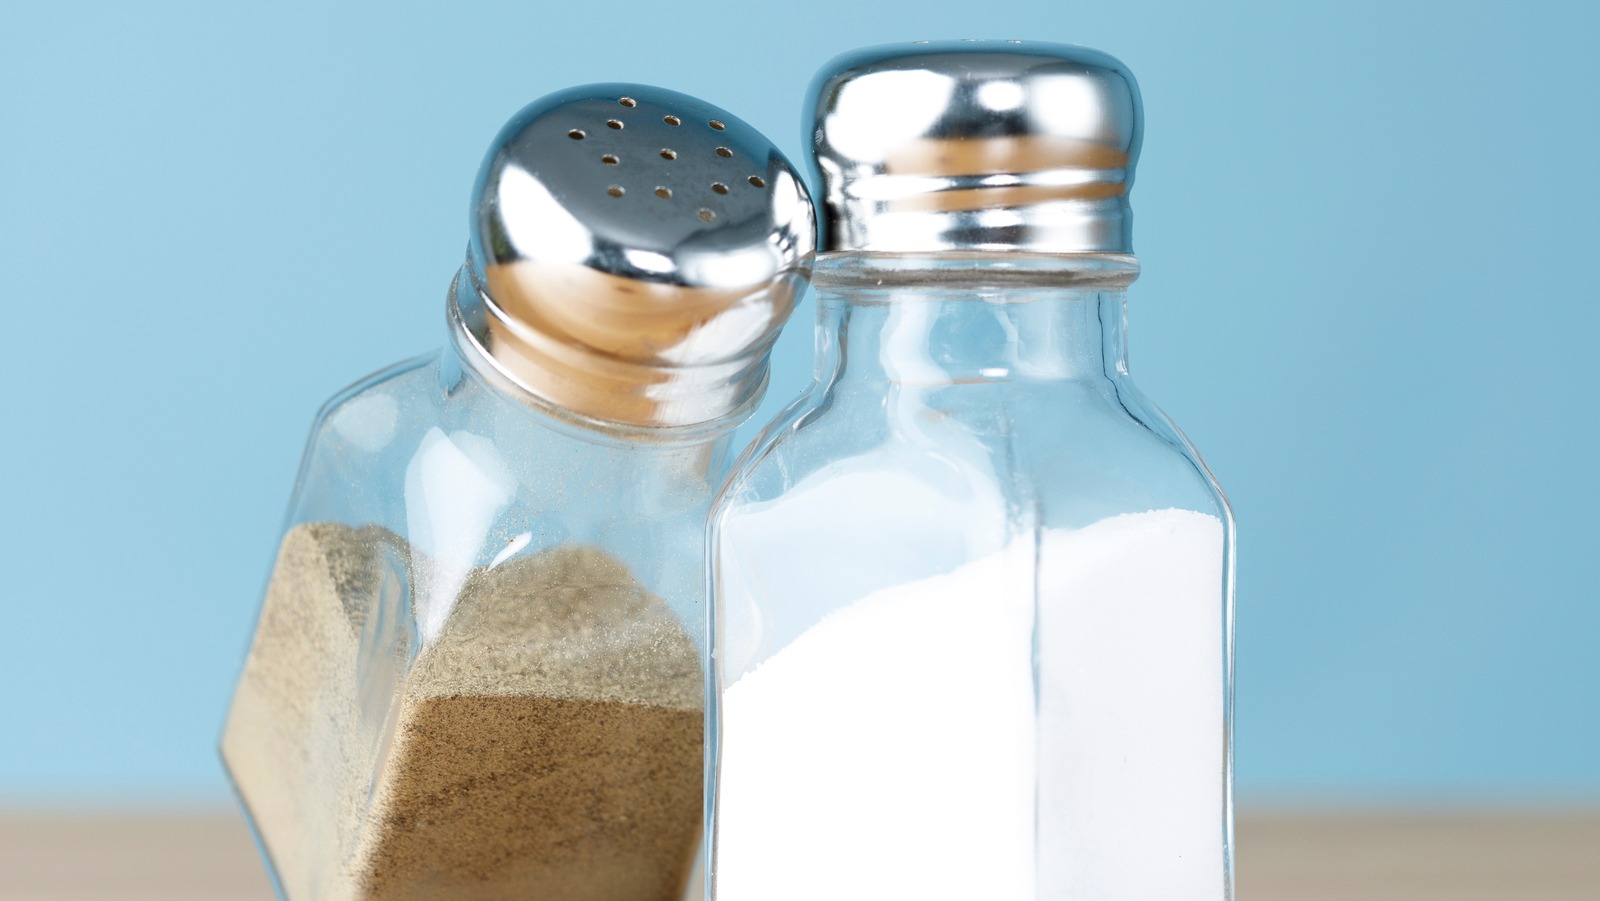 https://www.thedailymeal.com/img/gallery/why-the-heck-do-we-use-salt-pepper/l-intro-1672860559.jpg